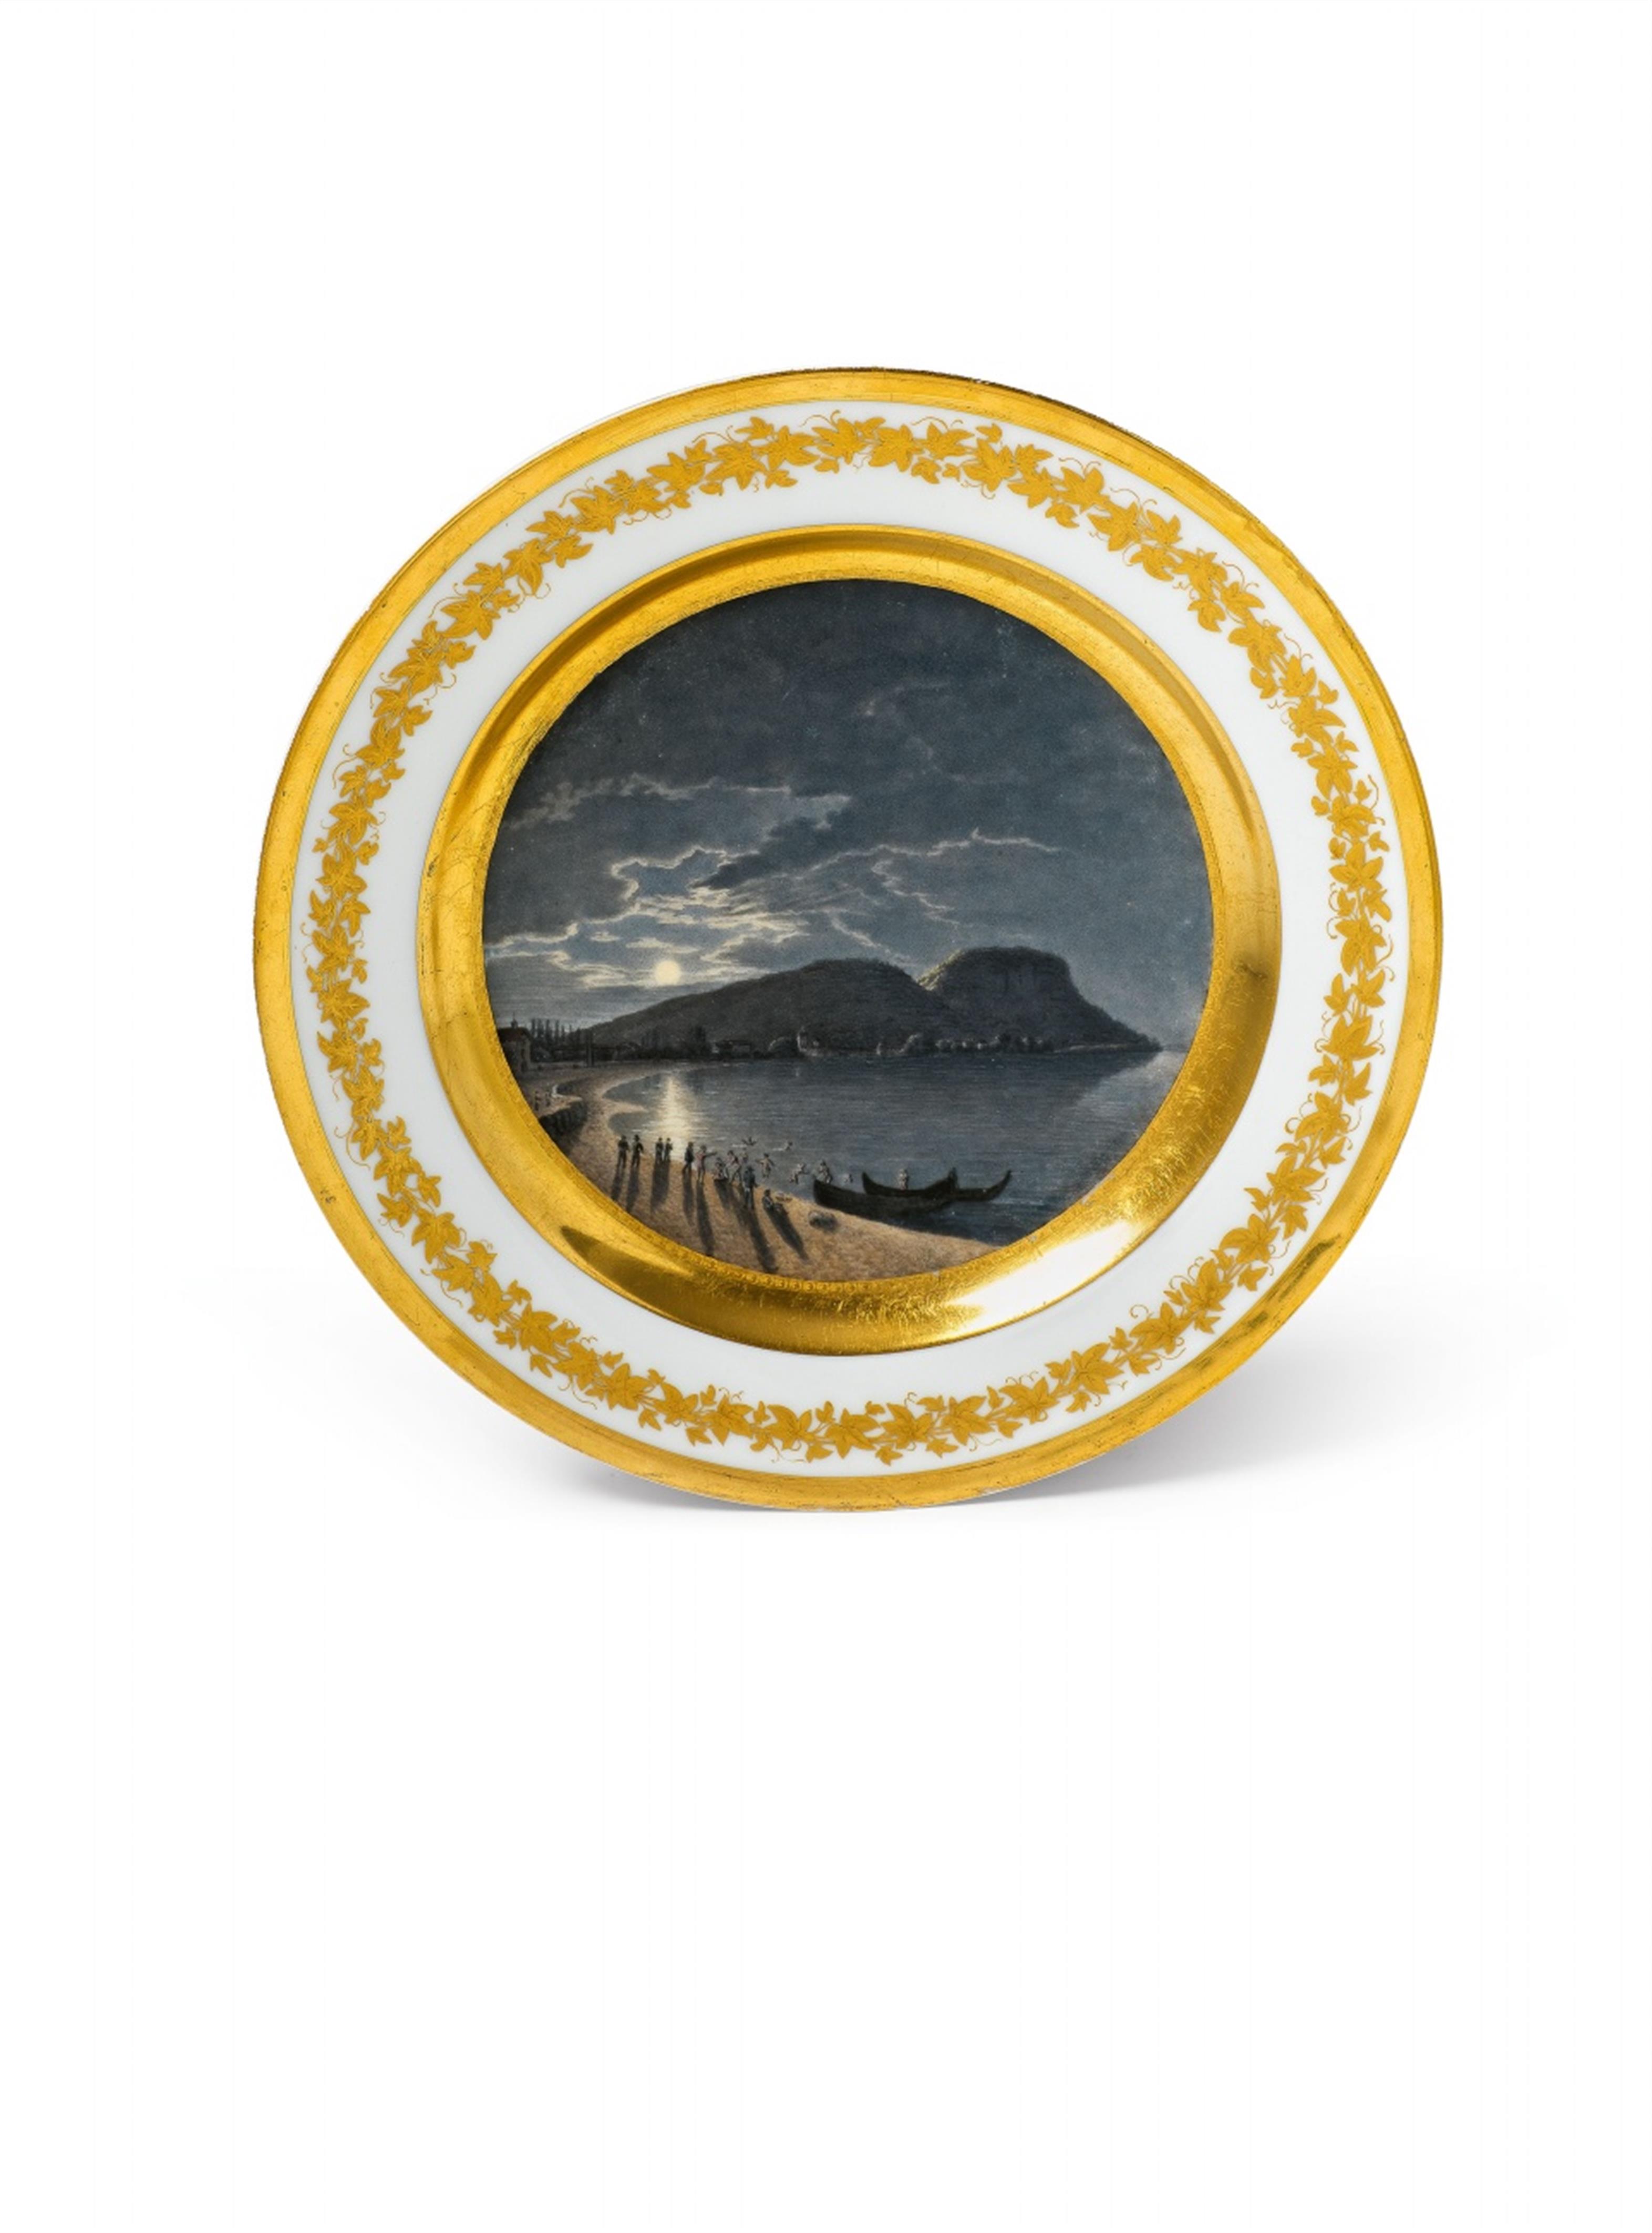 A rare Meissen porcelain plate with a view of Garda by moonlight - image-1